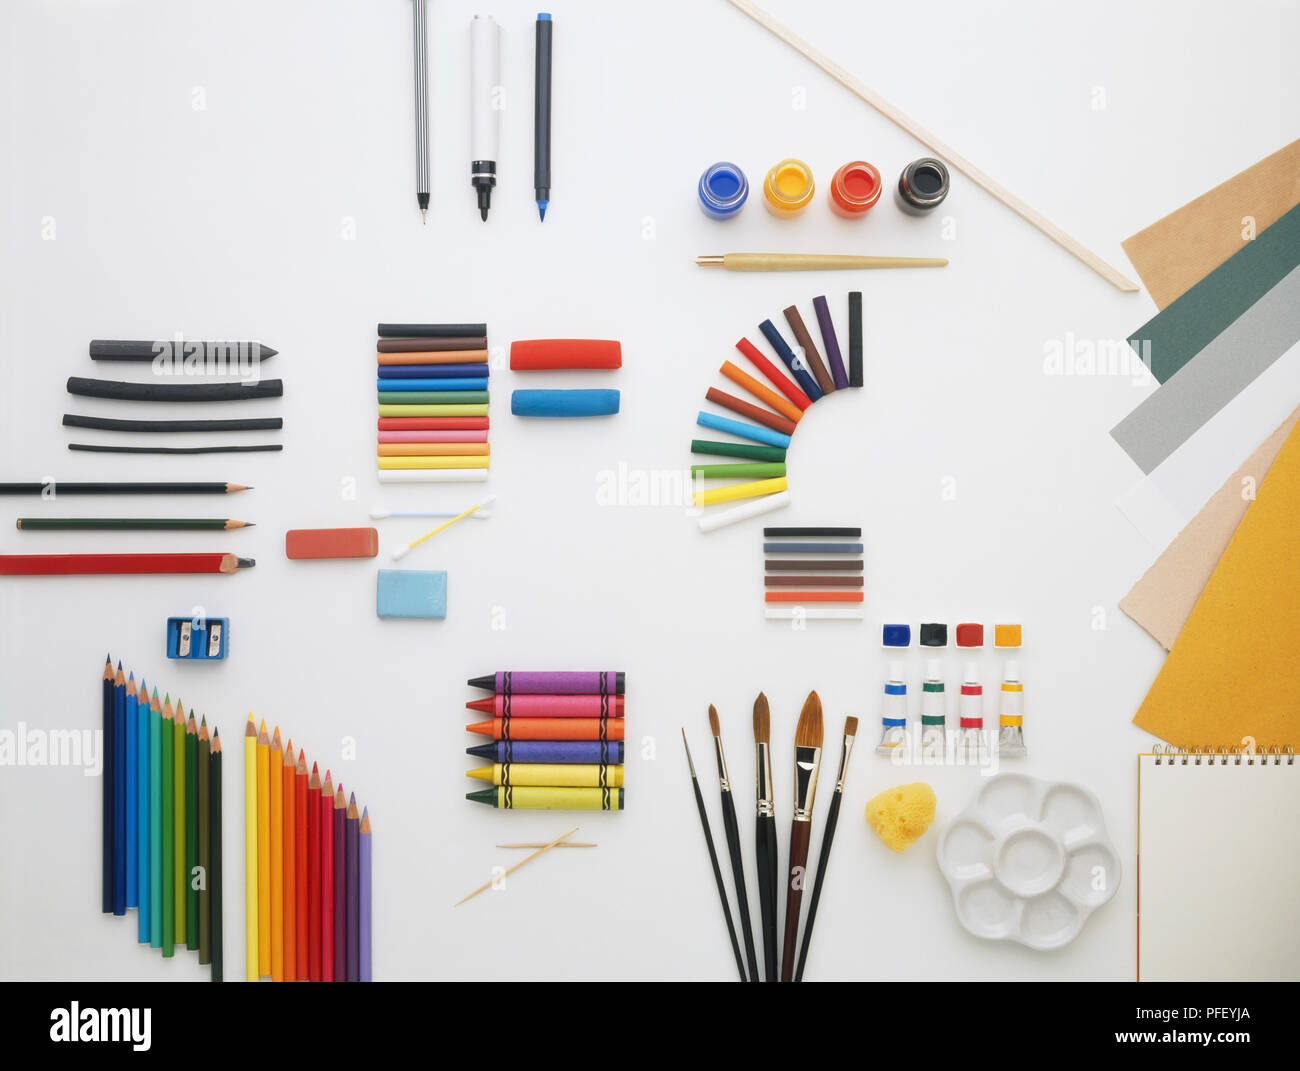 Selection of art materials, including pens, pencils, crayons, pastels, charcoal, paint, paint brushes, paper Stock Photo